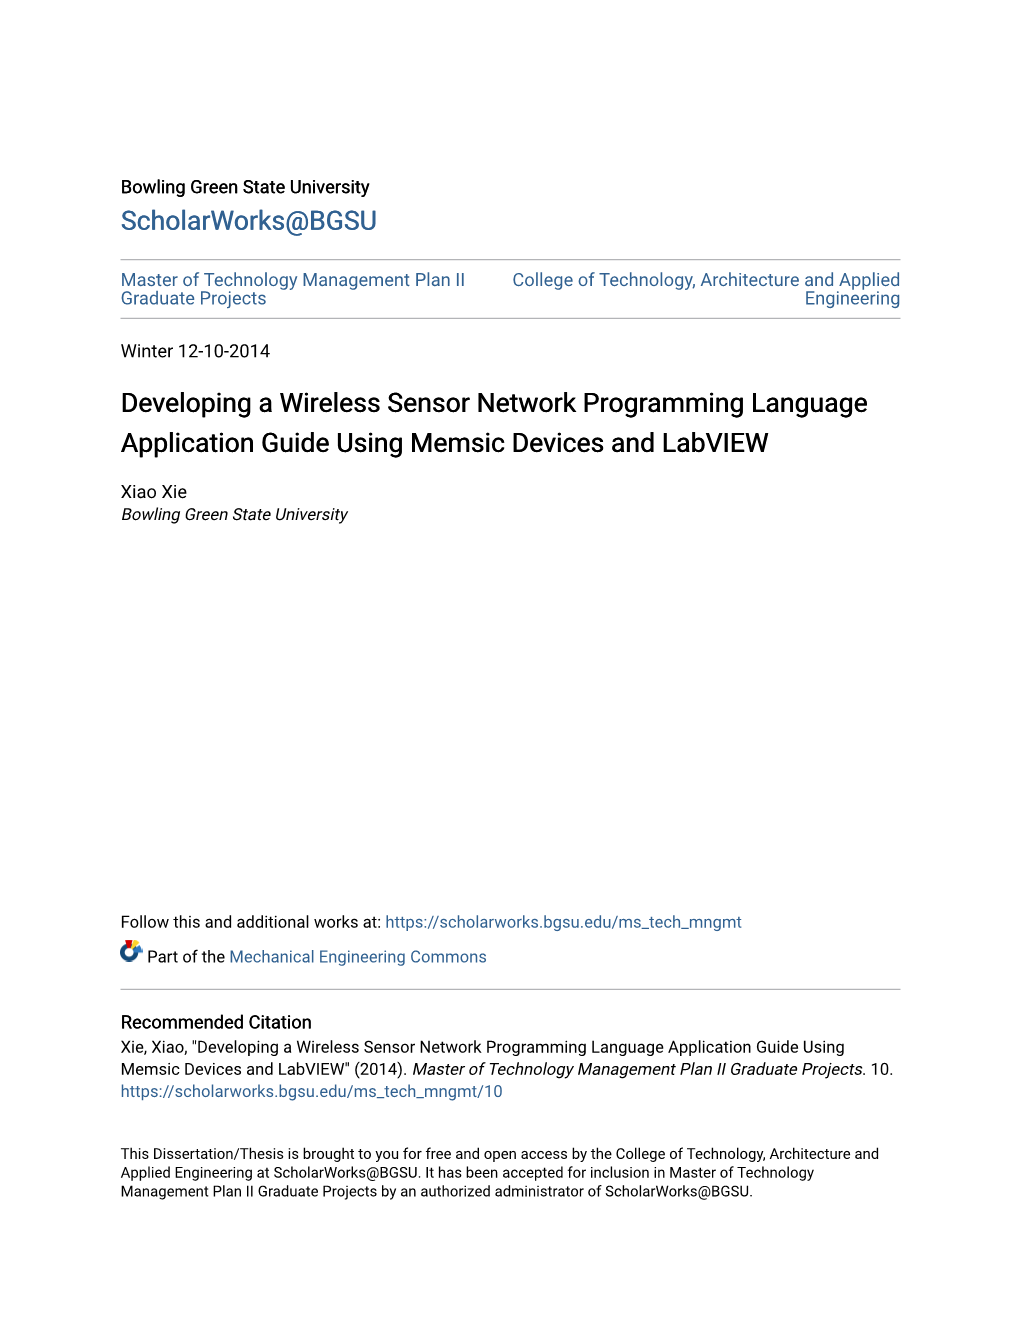 Developing a Wireless Sensor Network Programming Language Application Guide Using Memsic Devices and Labview